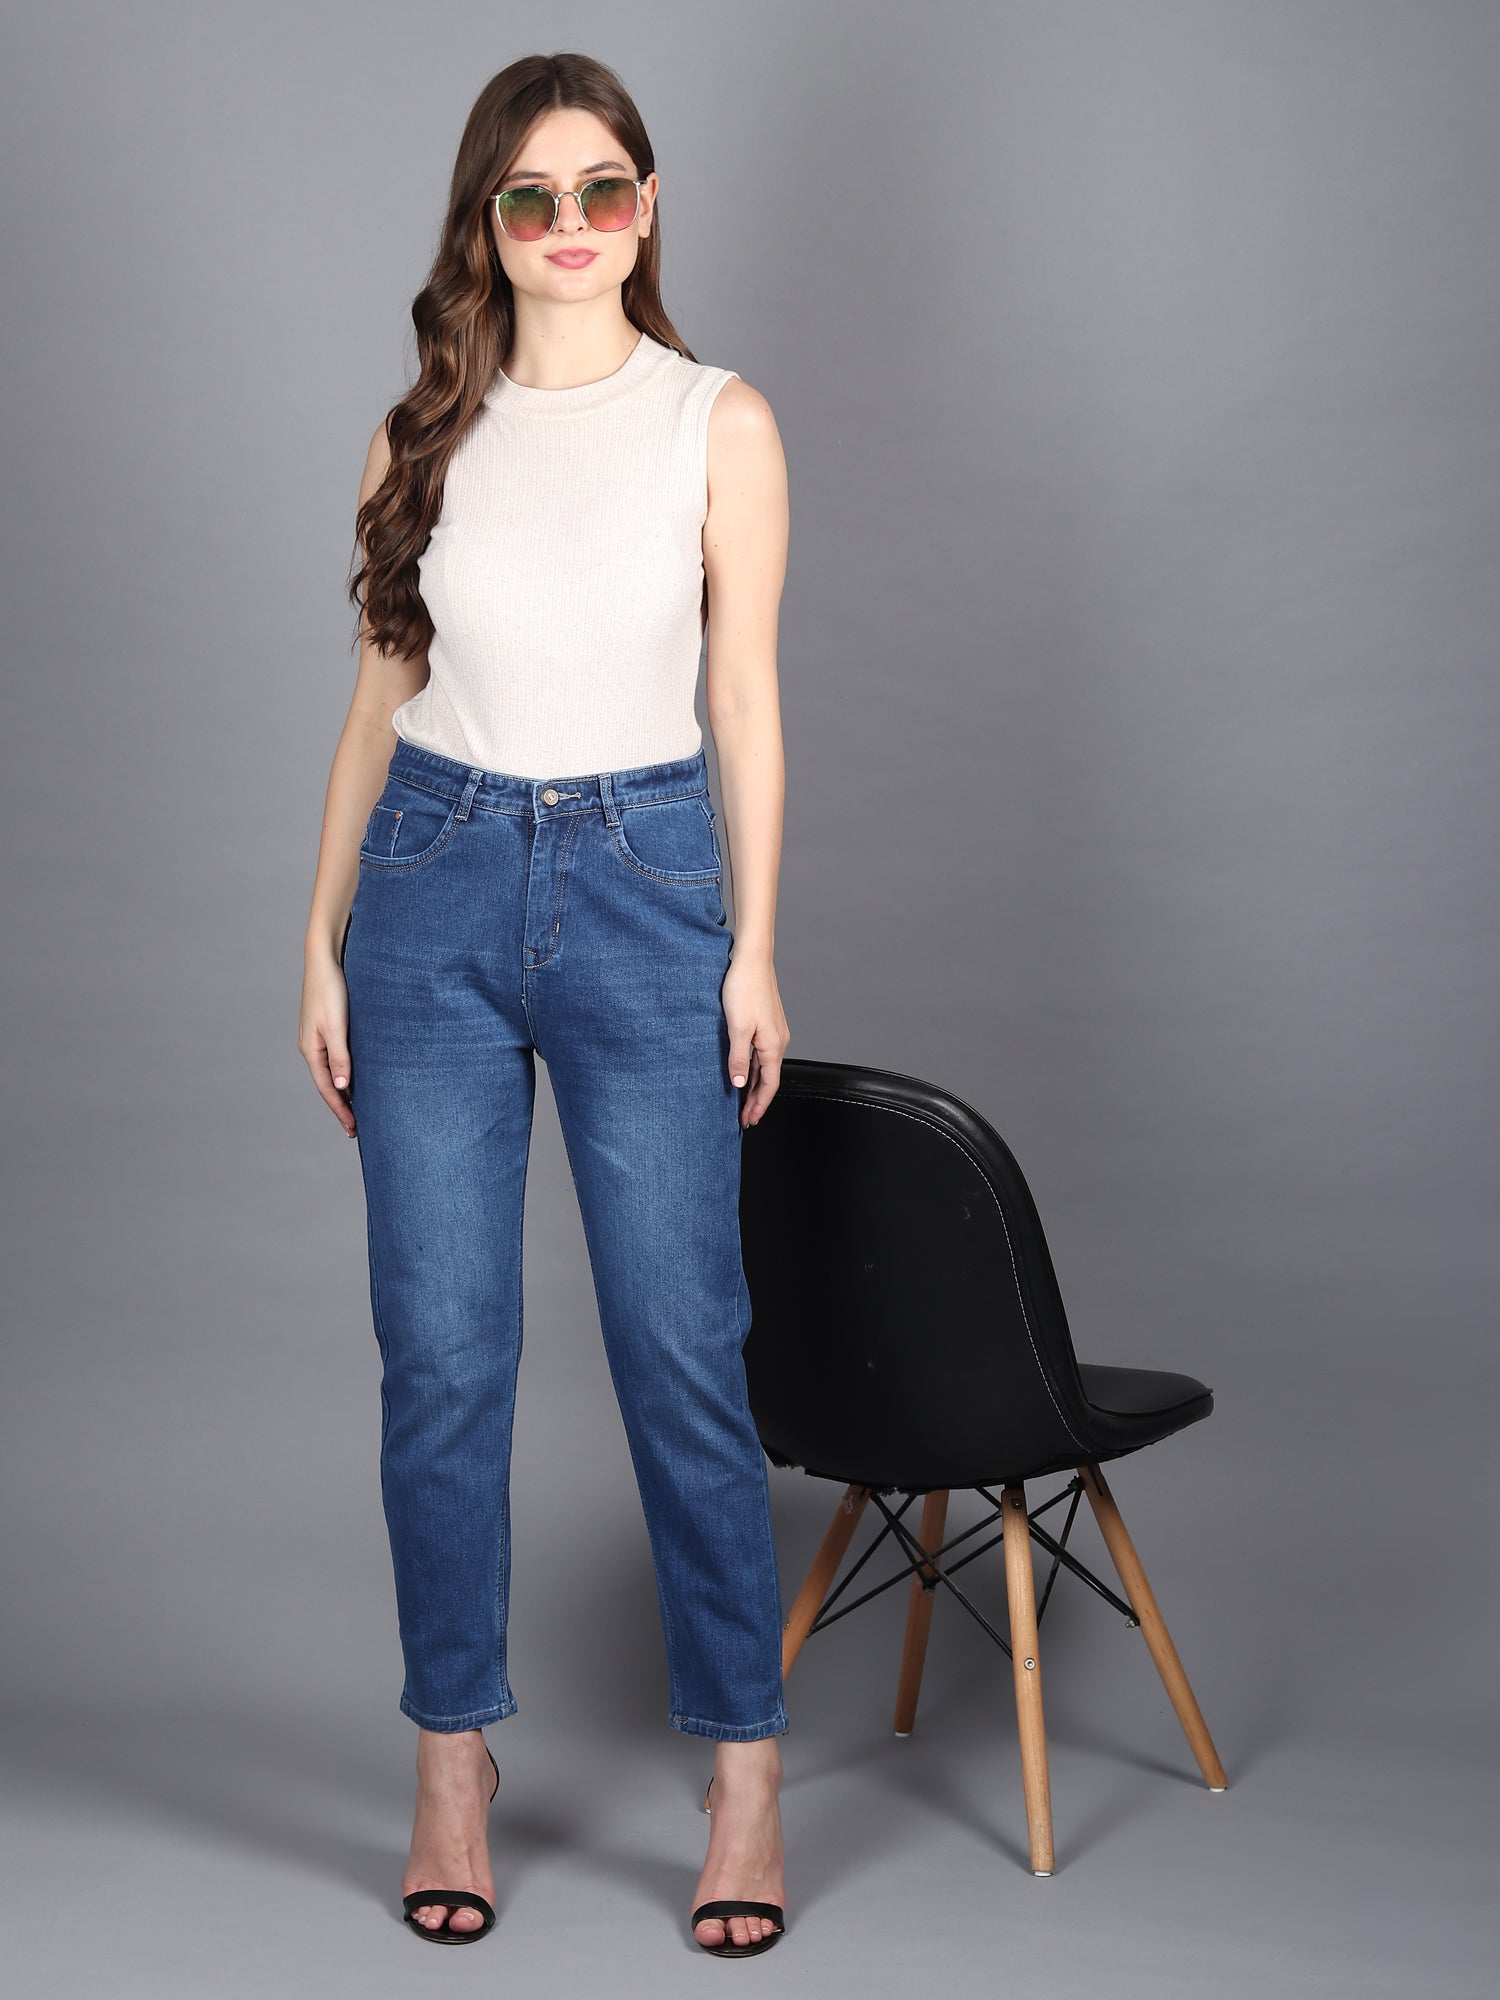 F&F launches it most sustainable jeans yet | The LYCRA Company